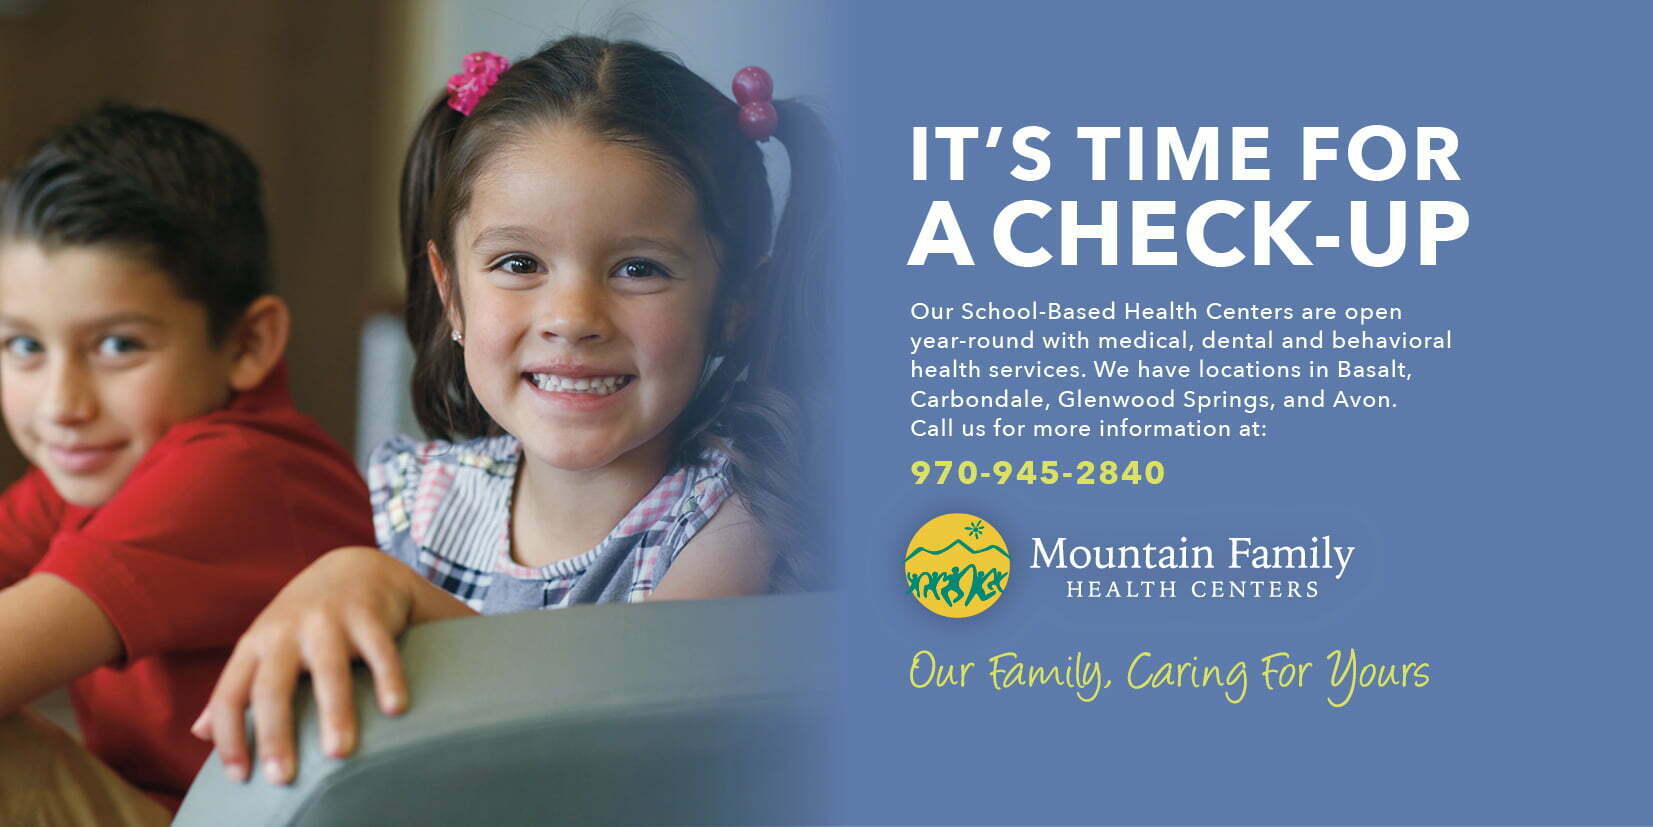 It's time for a check-up. Our School-based Health Centers are open year-round with medical, dental and behavioral health services. We have locations in Basalt, Carbondale, Glenwood Springs, and Avon. Call us for more information at 970-945-2840.